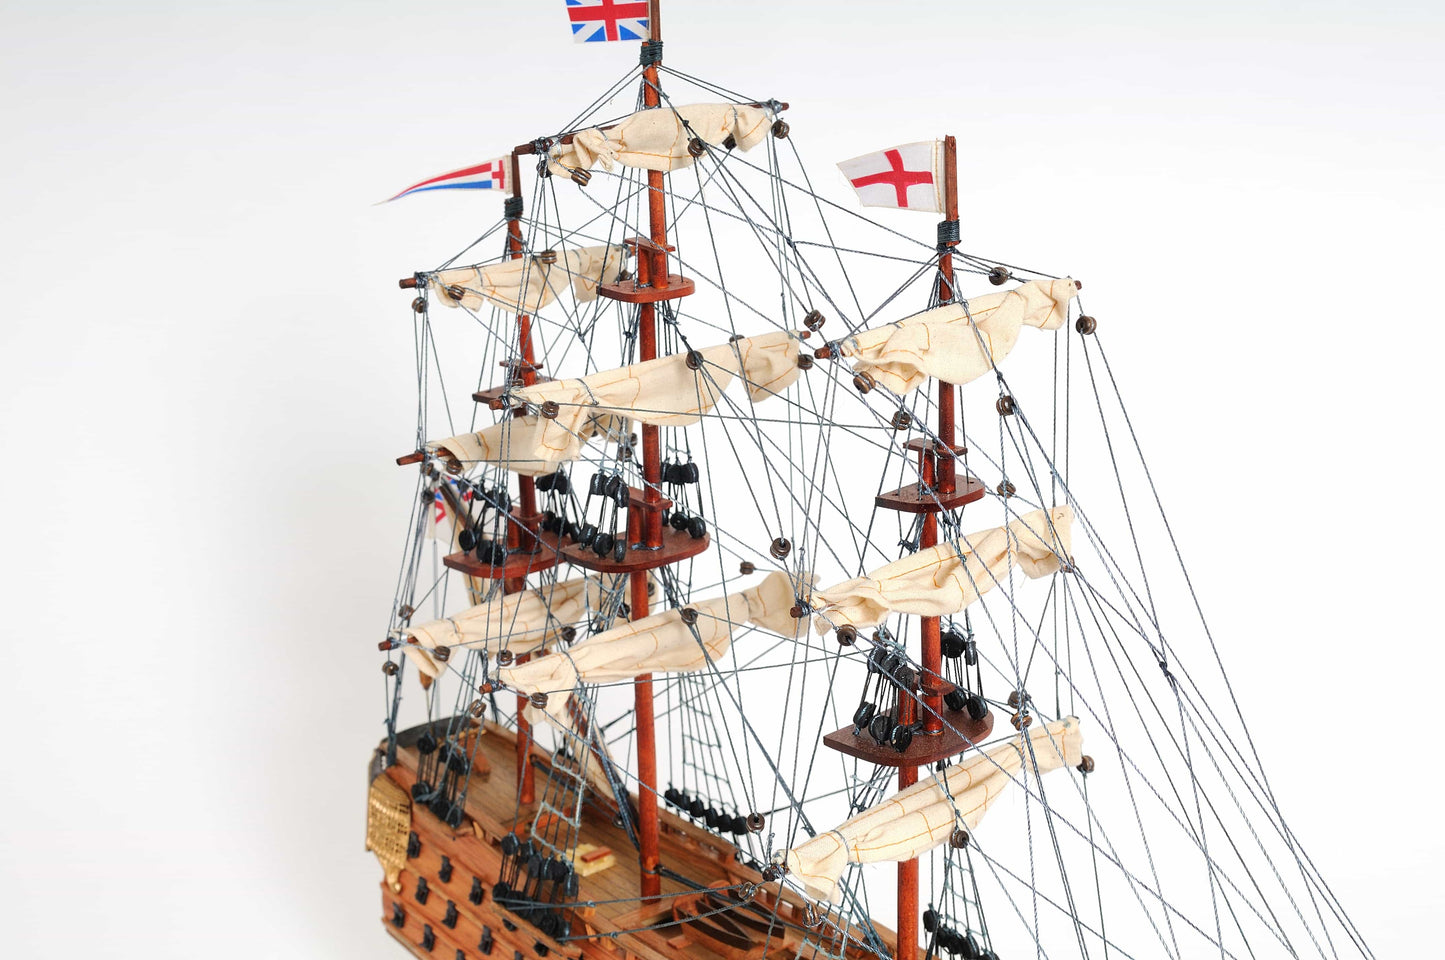 Aldo Hobbies & Creative Arts> Collectibles> Scale Model new / Wood / L: 19.5 W: 7 H: 18 Inches HMS Victory Small Tallship Wood Model Sailboat Assembled